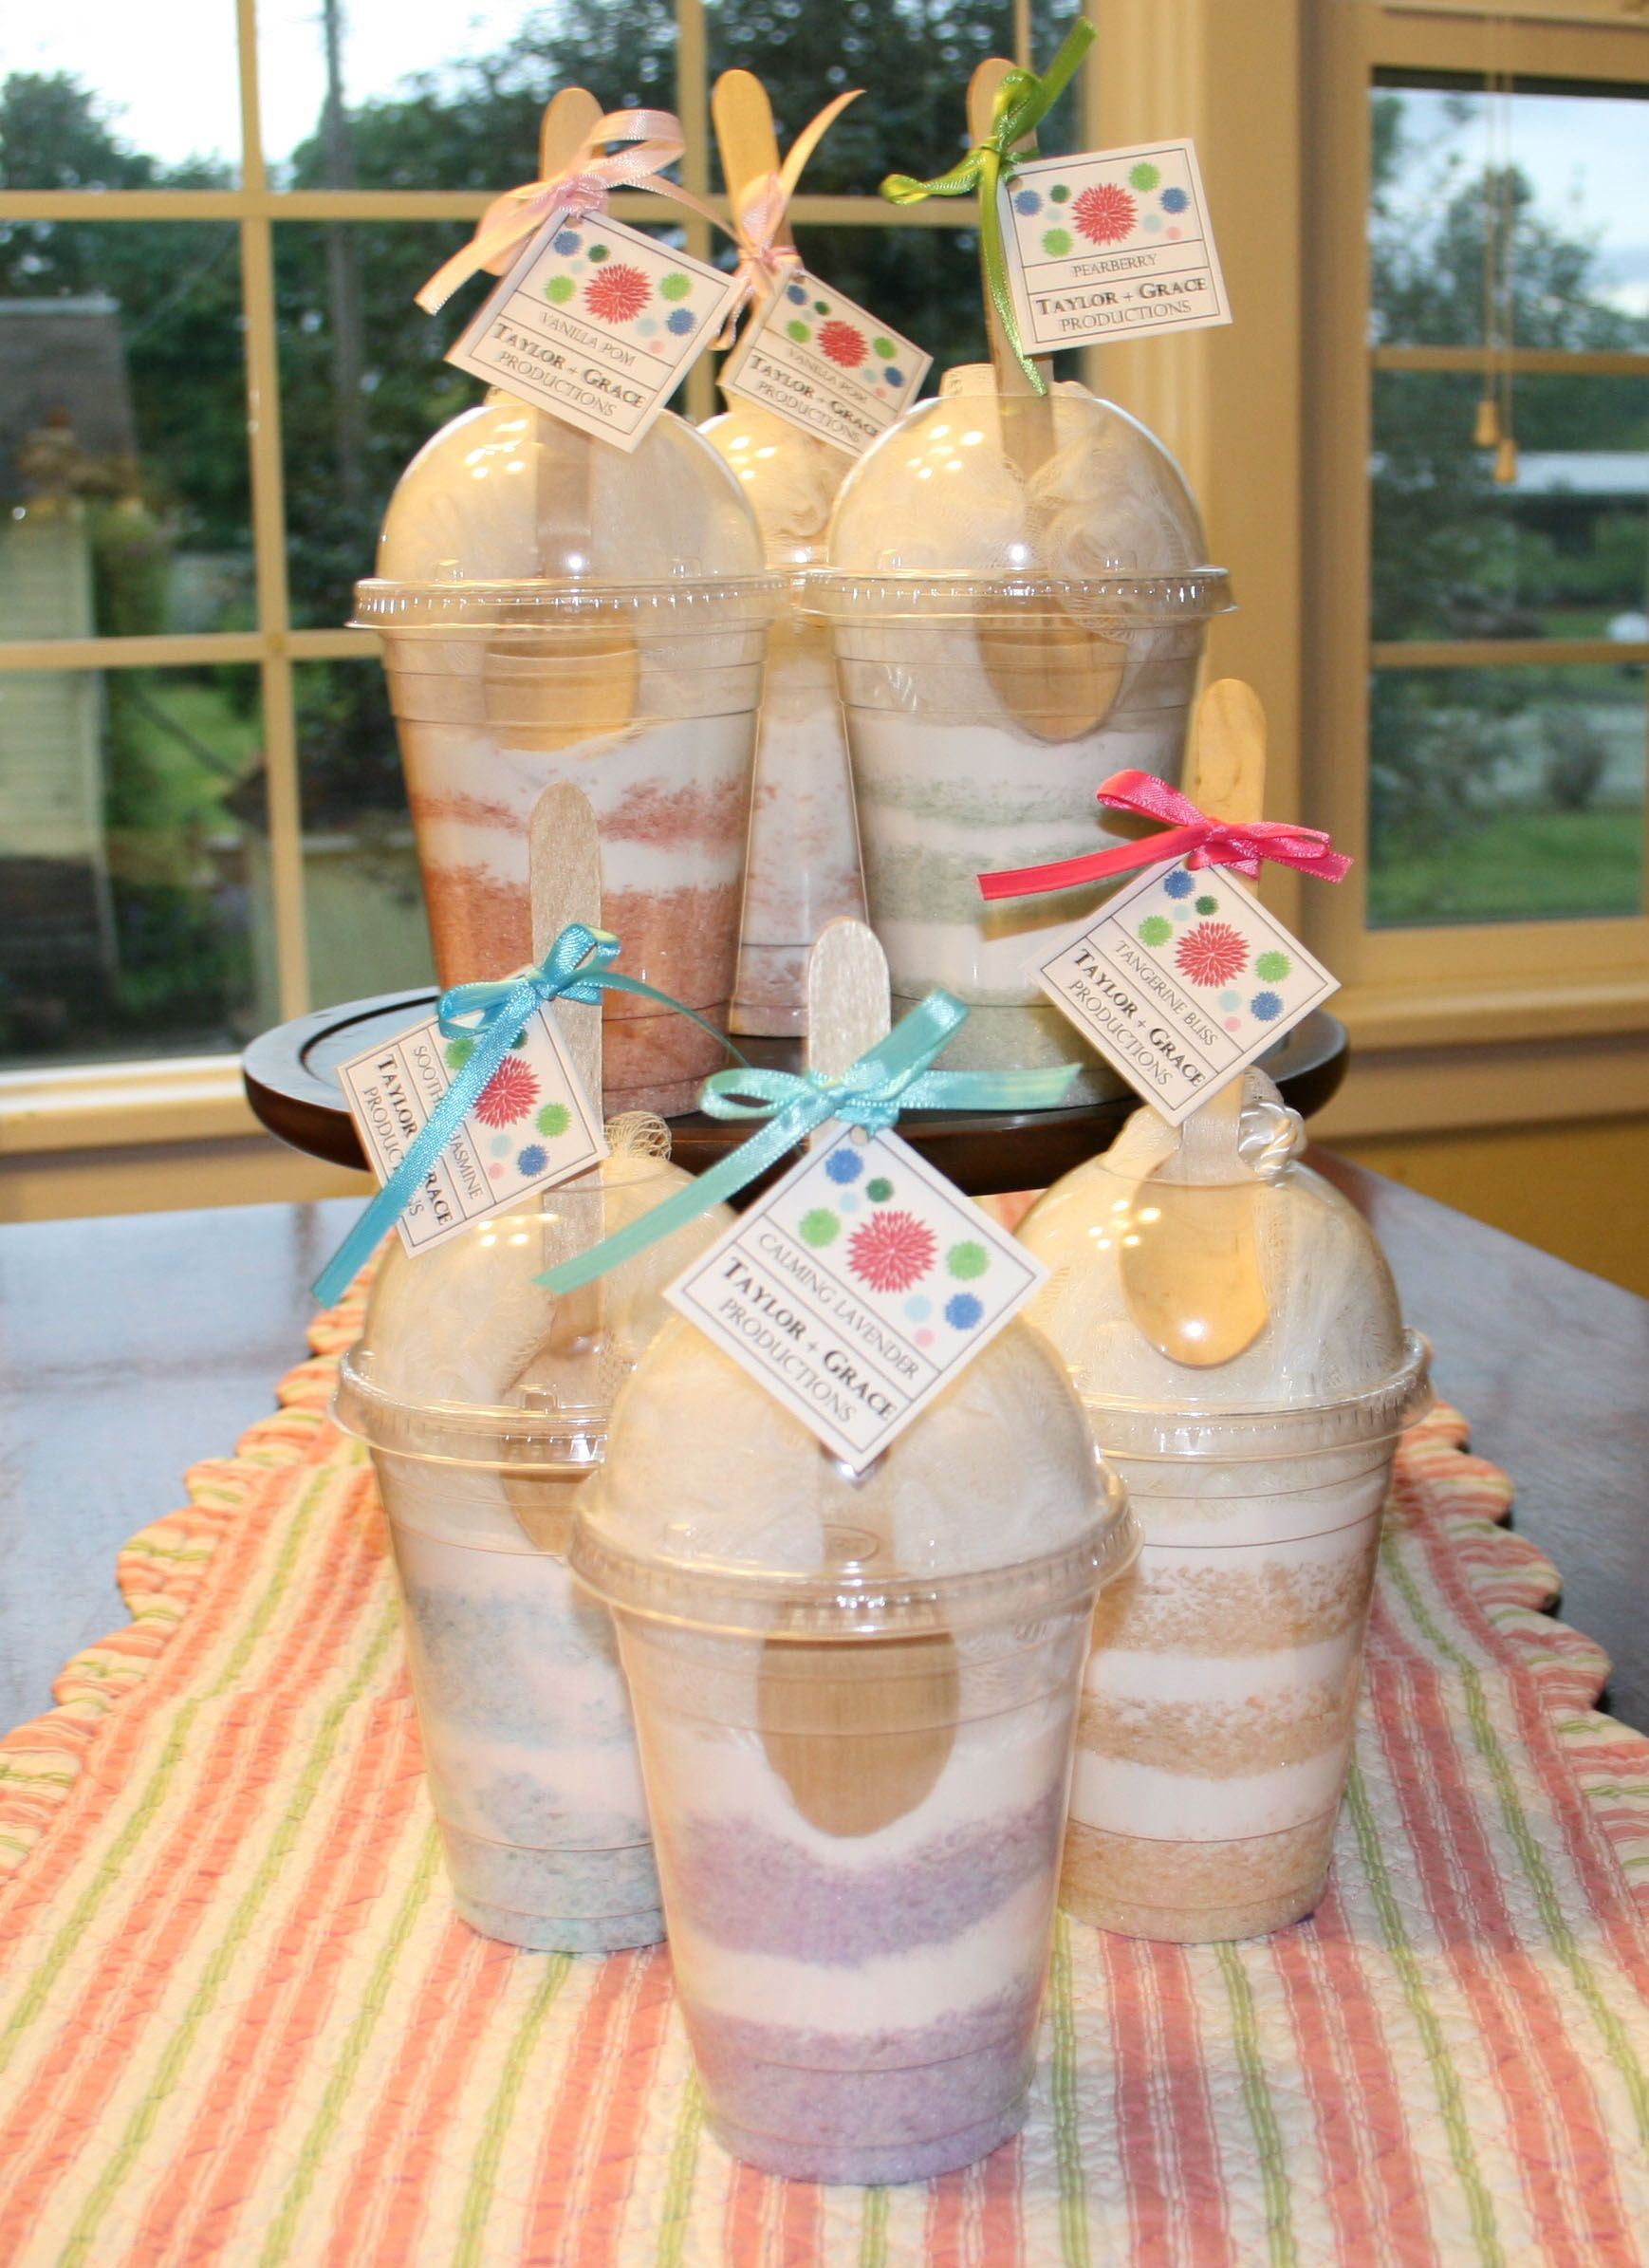 DIY Bath Gift Basket
 Bath salt sundaes topped with a pouf wooden spoon for